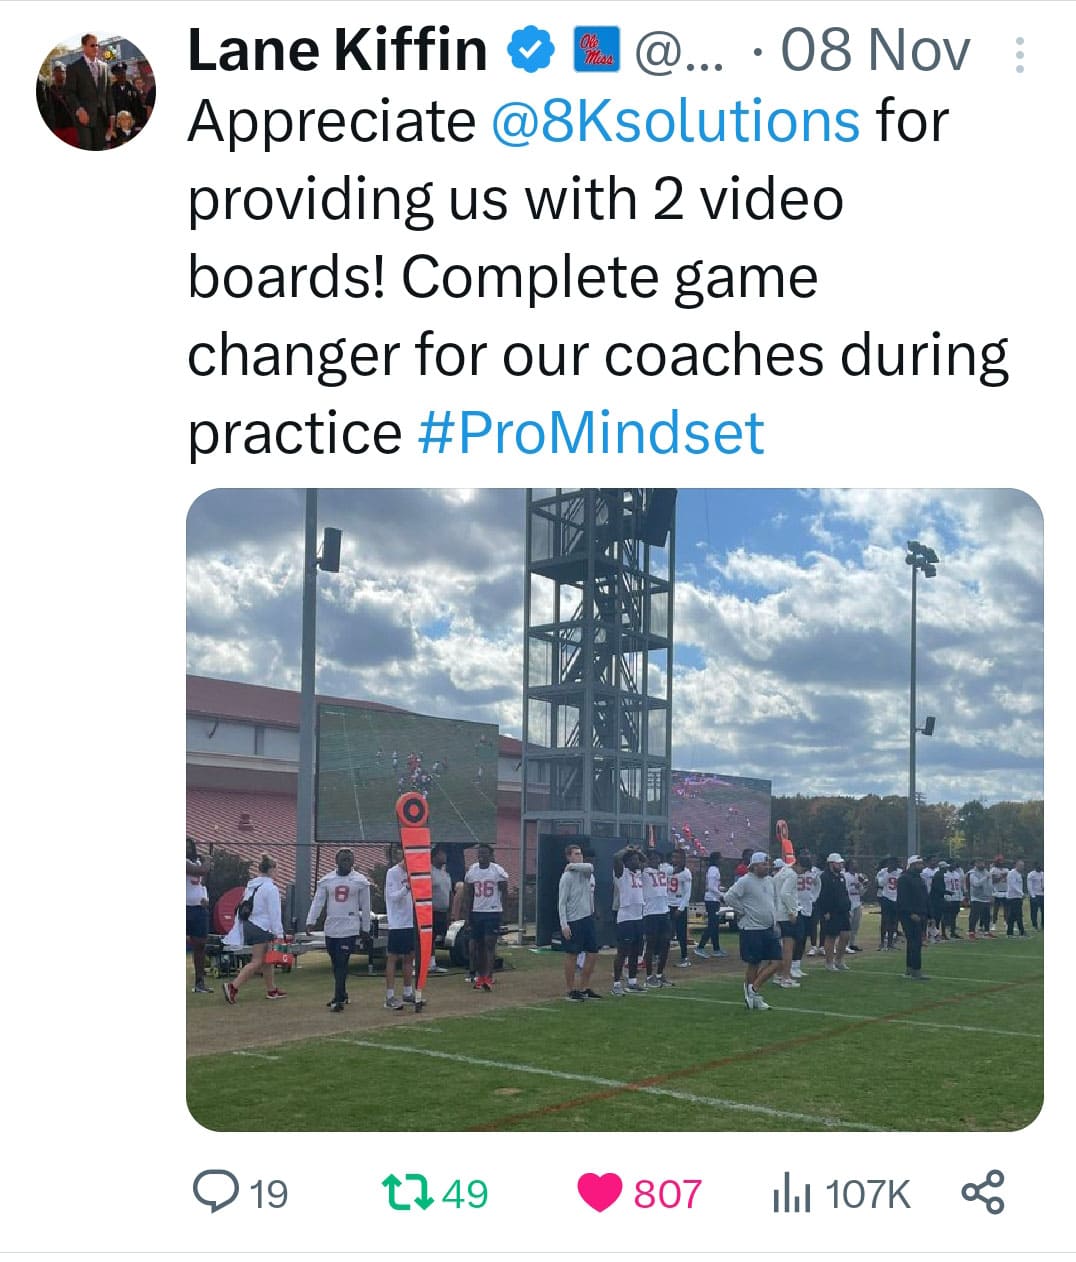 Screen capture of a post of X by Ole Miss Football Coach Lane Kiffin that read," @Appreciate @8Ksolutions for providing us with 2 video boards! Complete game changer for our coaches during practice #ProMindset". This picture shows two Lyvve Coach boards set up at a team practice.